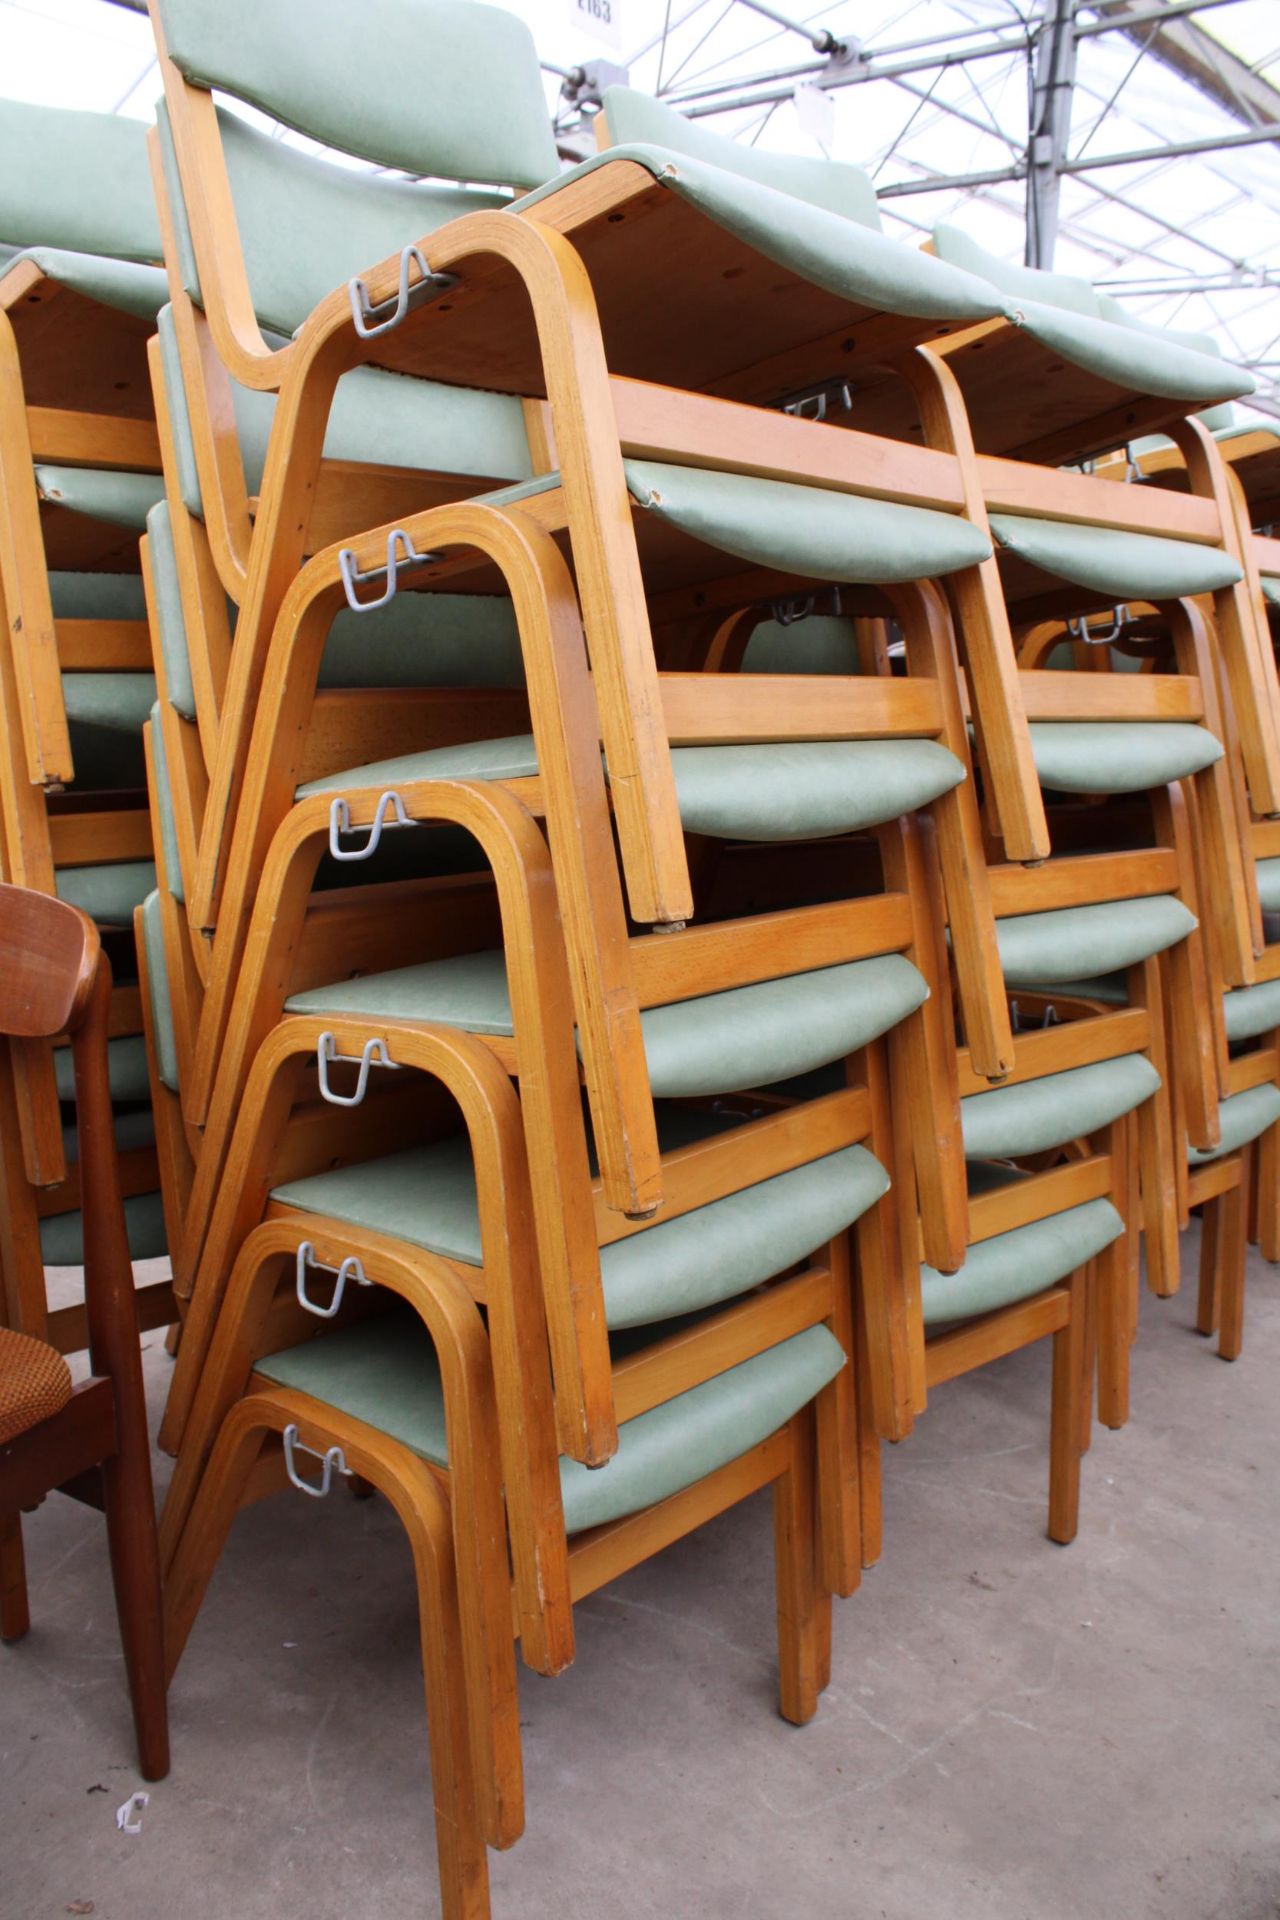 TWENTY FOUR MODERN BENTWOOD STACKING CHAIRS - Image 2 of 3